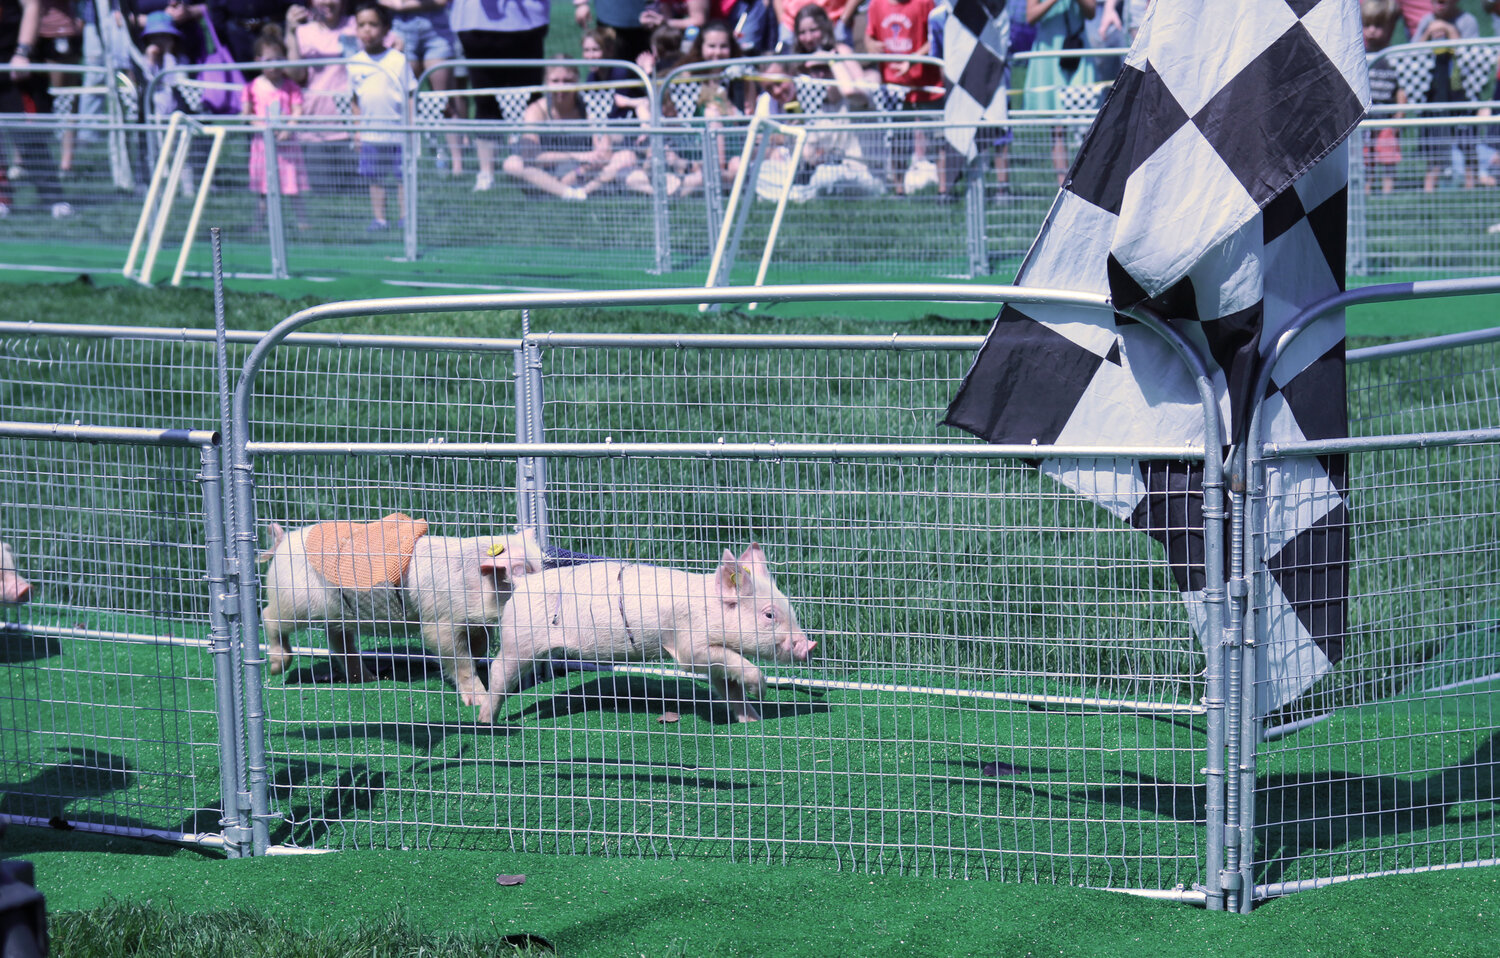 A-Day spectators take in some pig races at Delaware Valley University over the weekend.